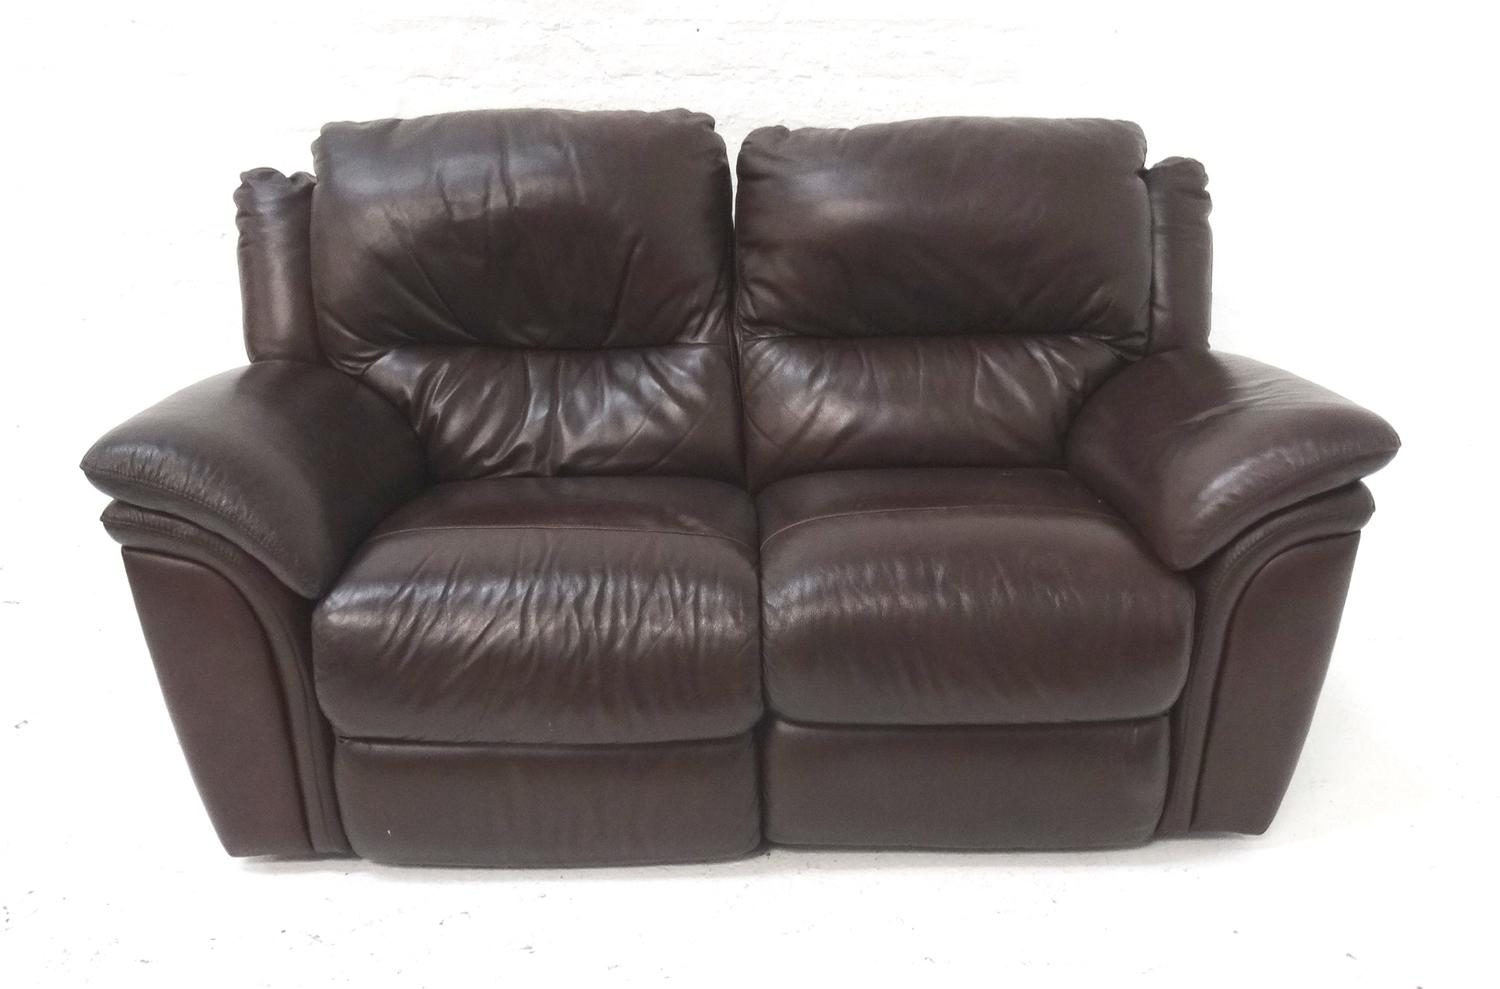 BROWN LEATHER TWO SEAT SOFA with electrically operated reclining seats, 168cm wide